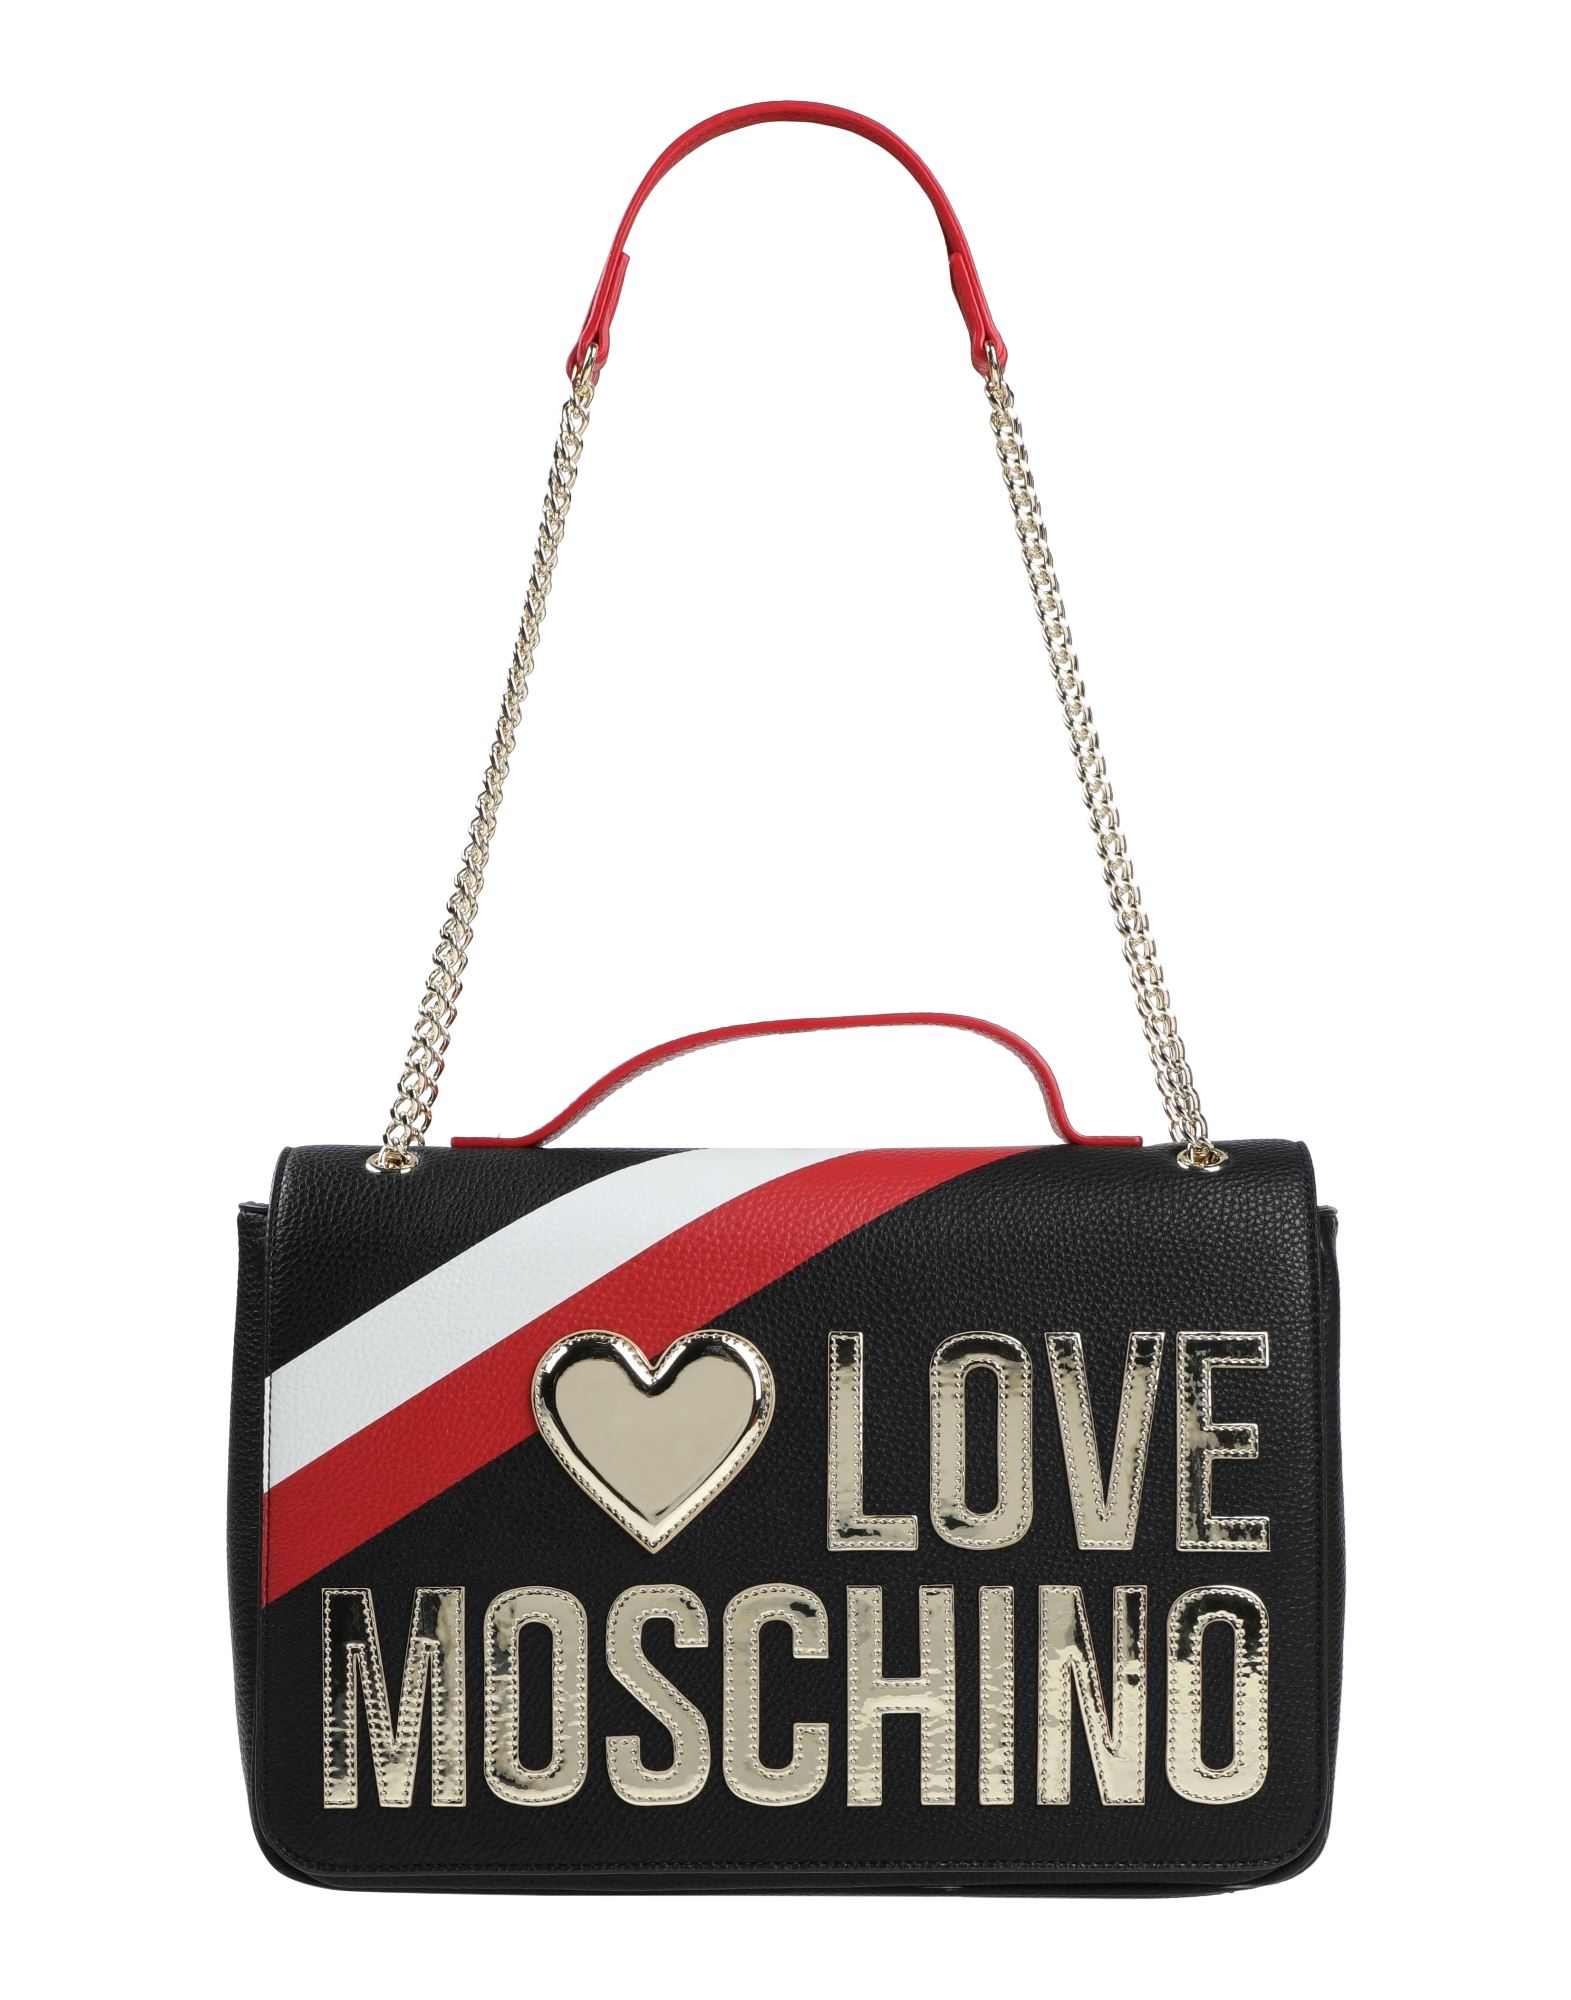 LOVE MOSCHINO Shoulder bags - Item 45553182